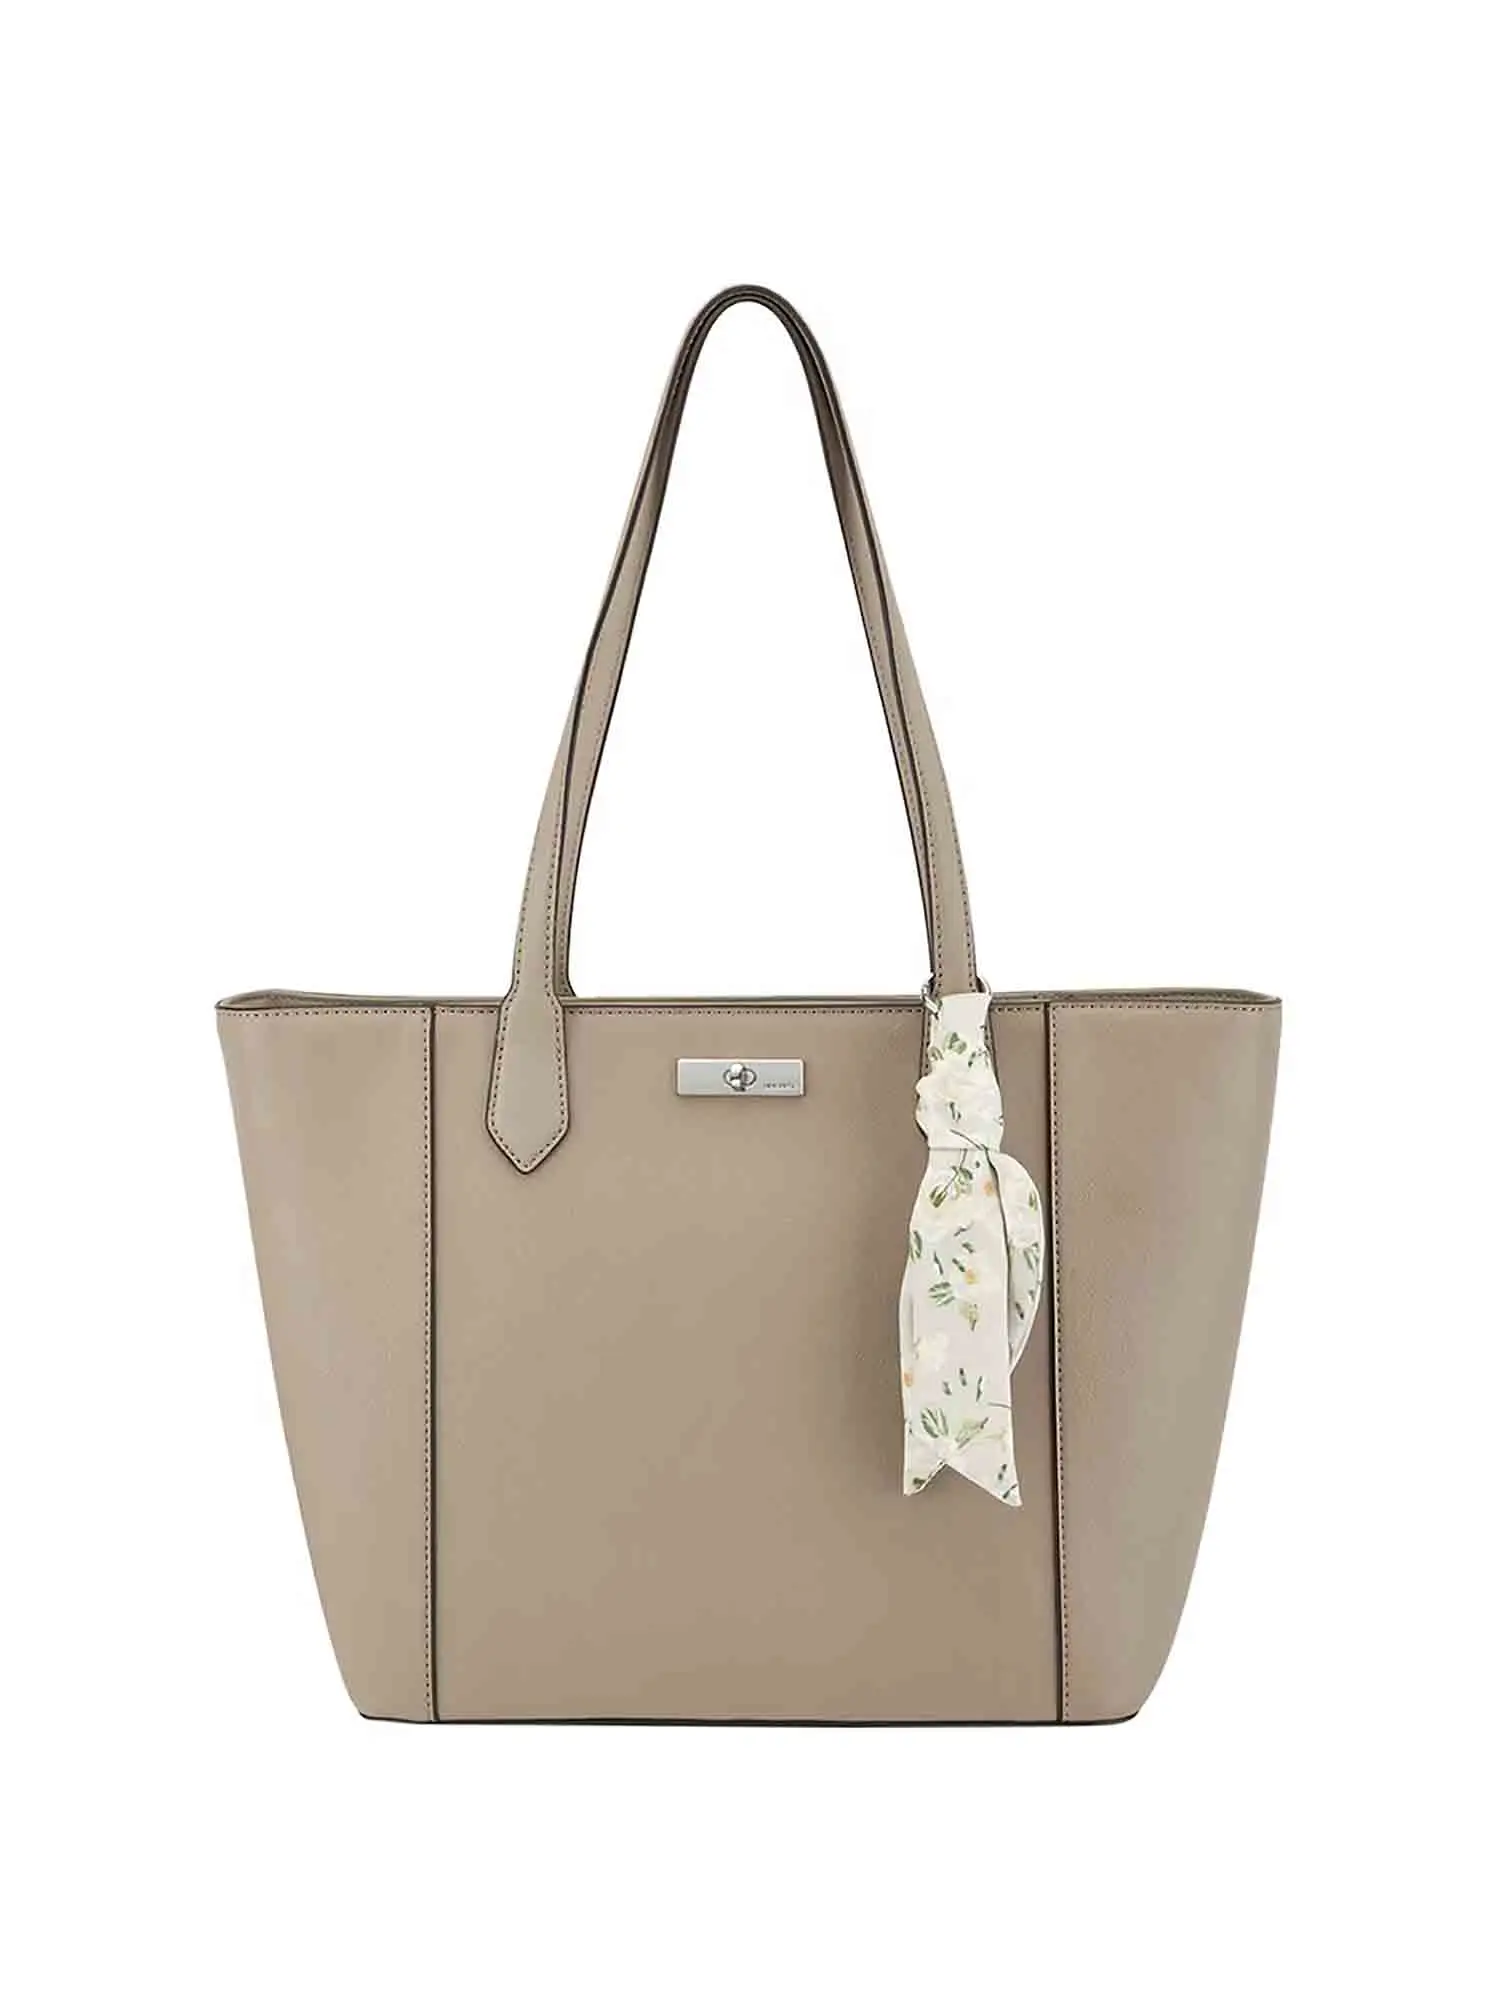 TOTE DONNA - NINE WEST - 101510605 S09 - BEIGE, UNICA